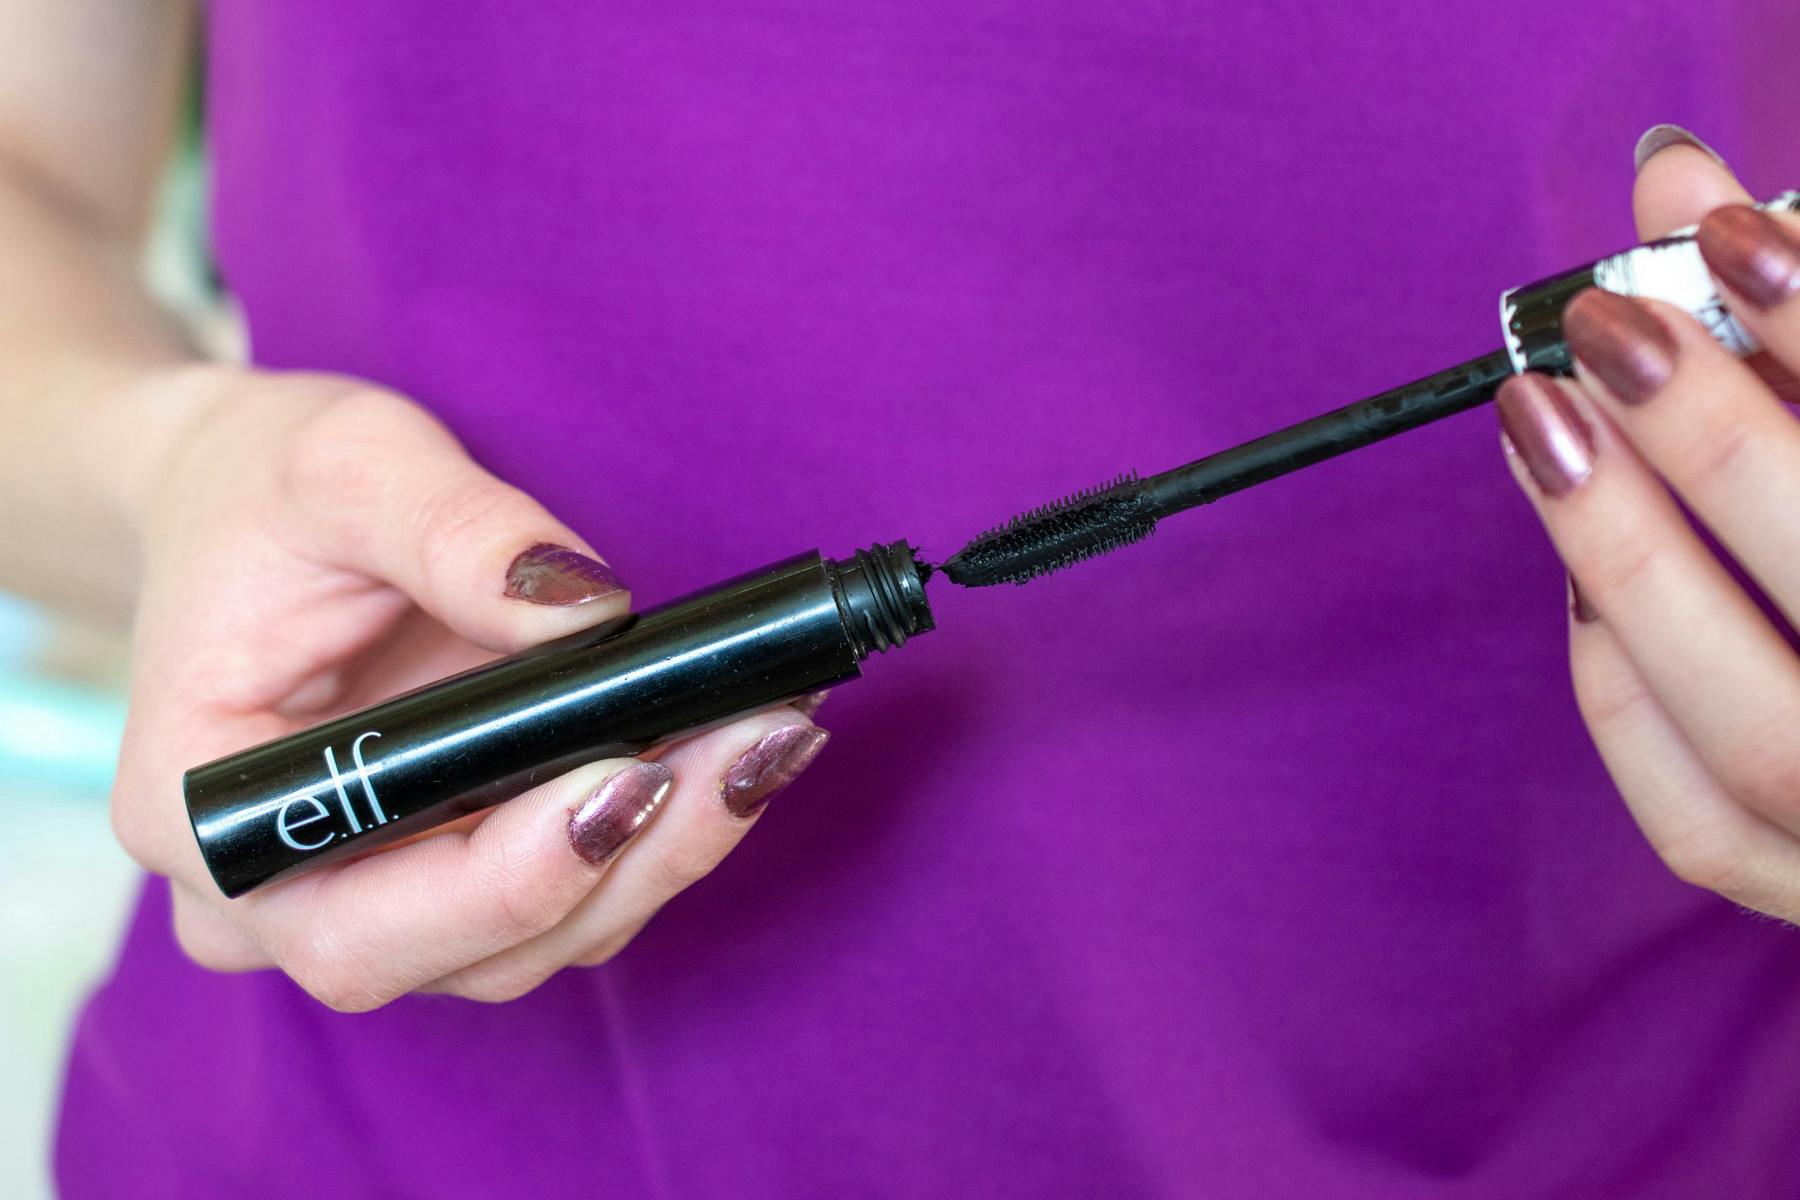 2. Save your favorite mascara wand to use with cheaper mascara.